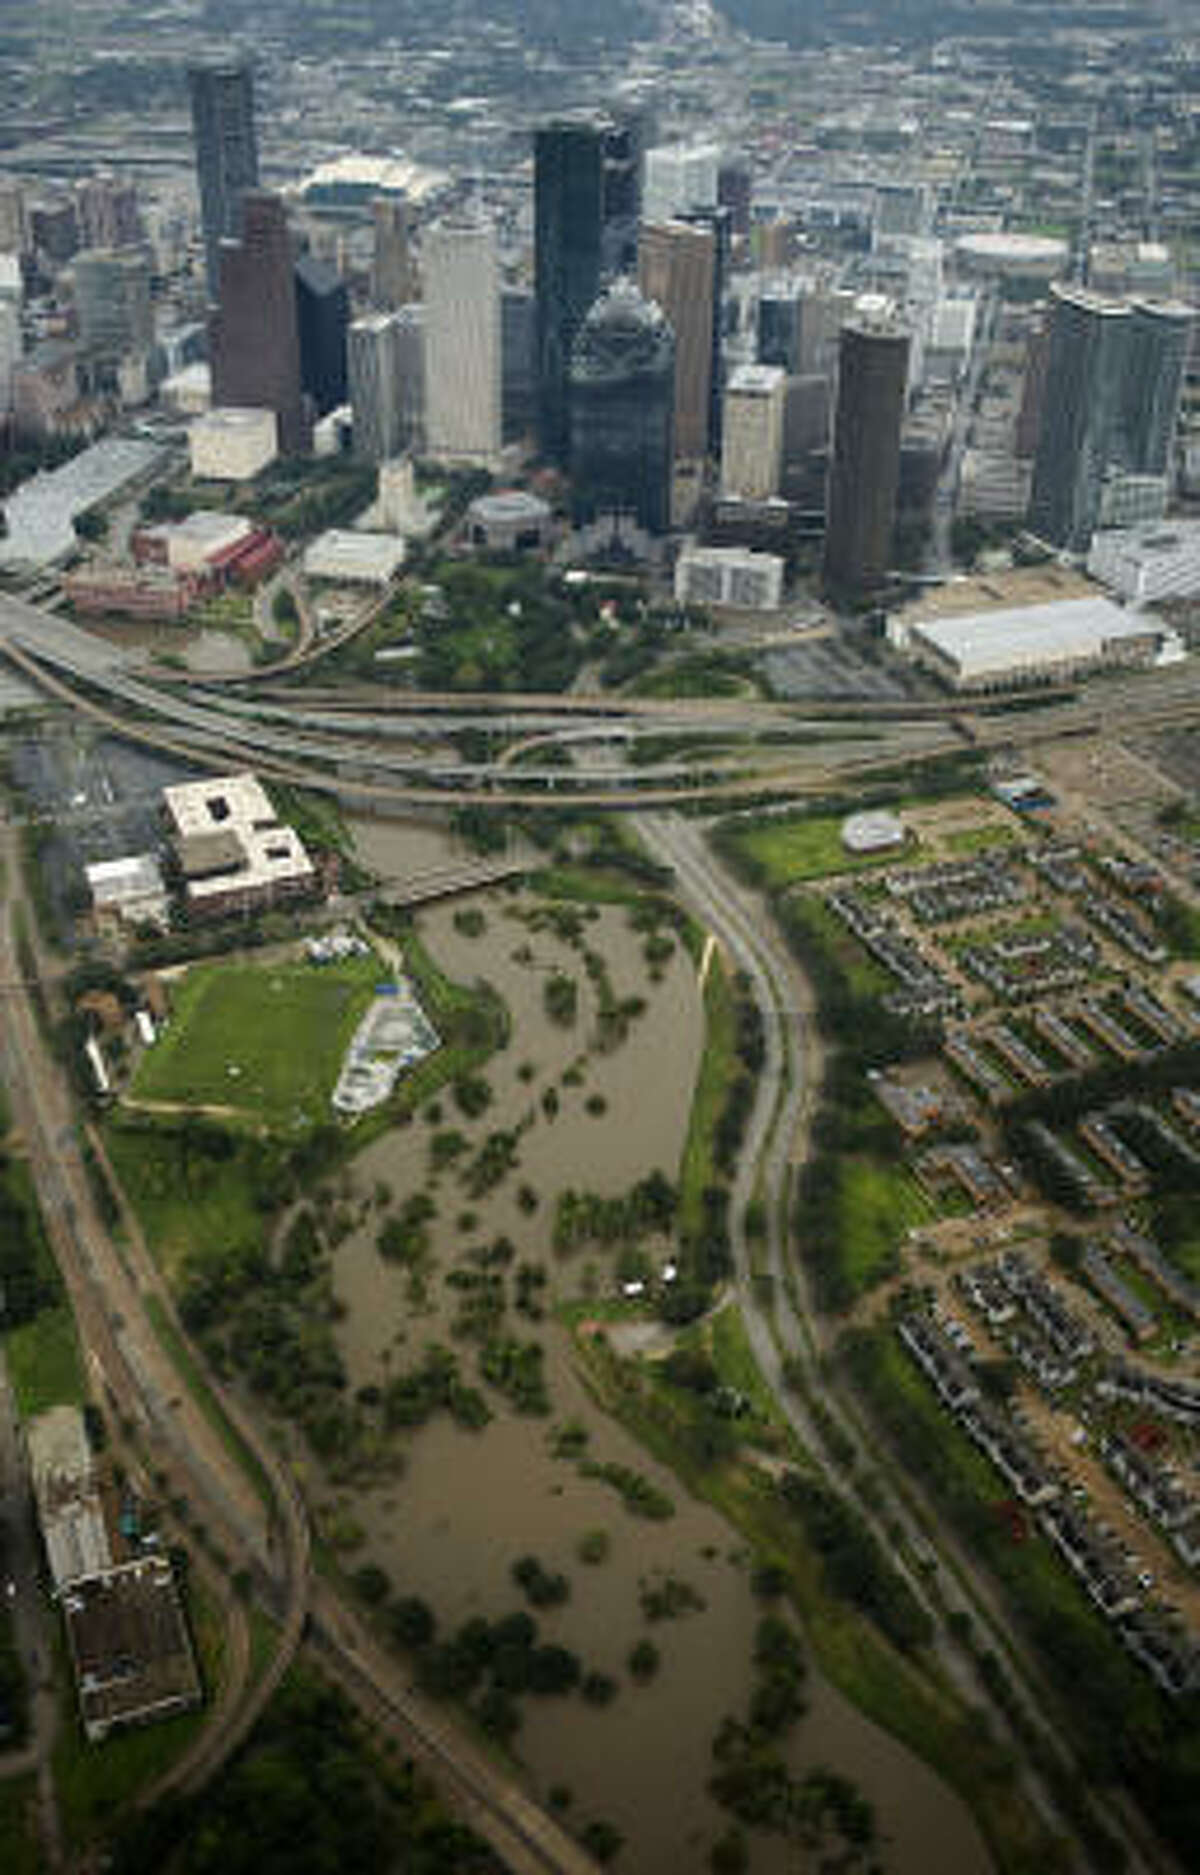 Buffalo Bayou nears its banks leading into downtown Houston after the passing of Hurricane Ike.